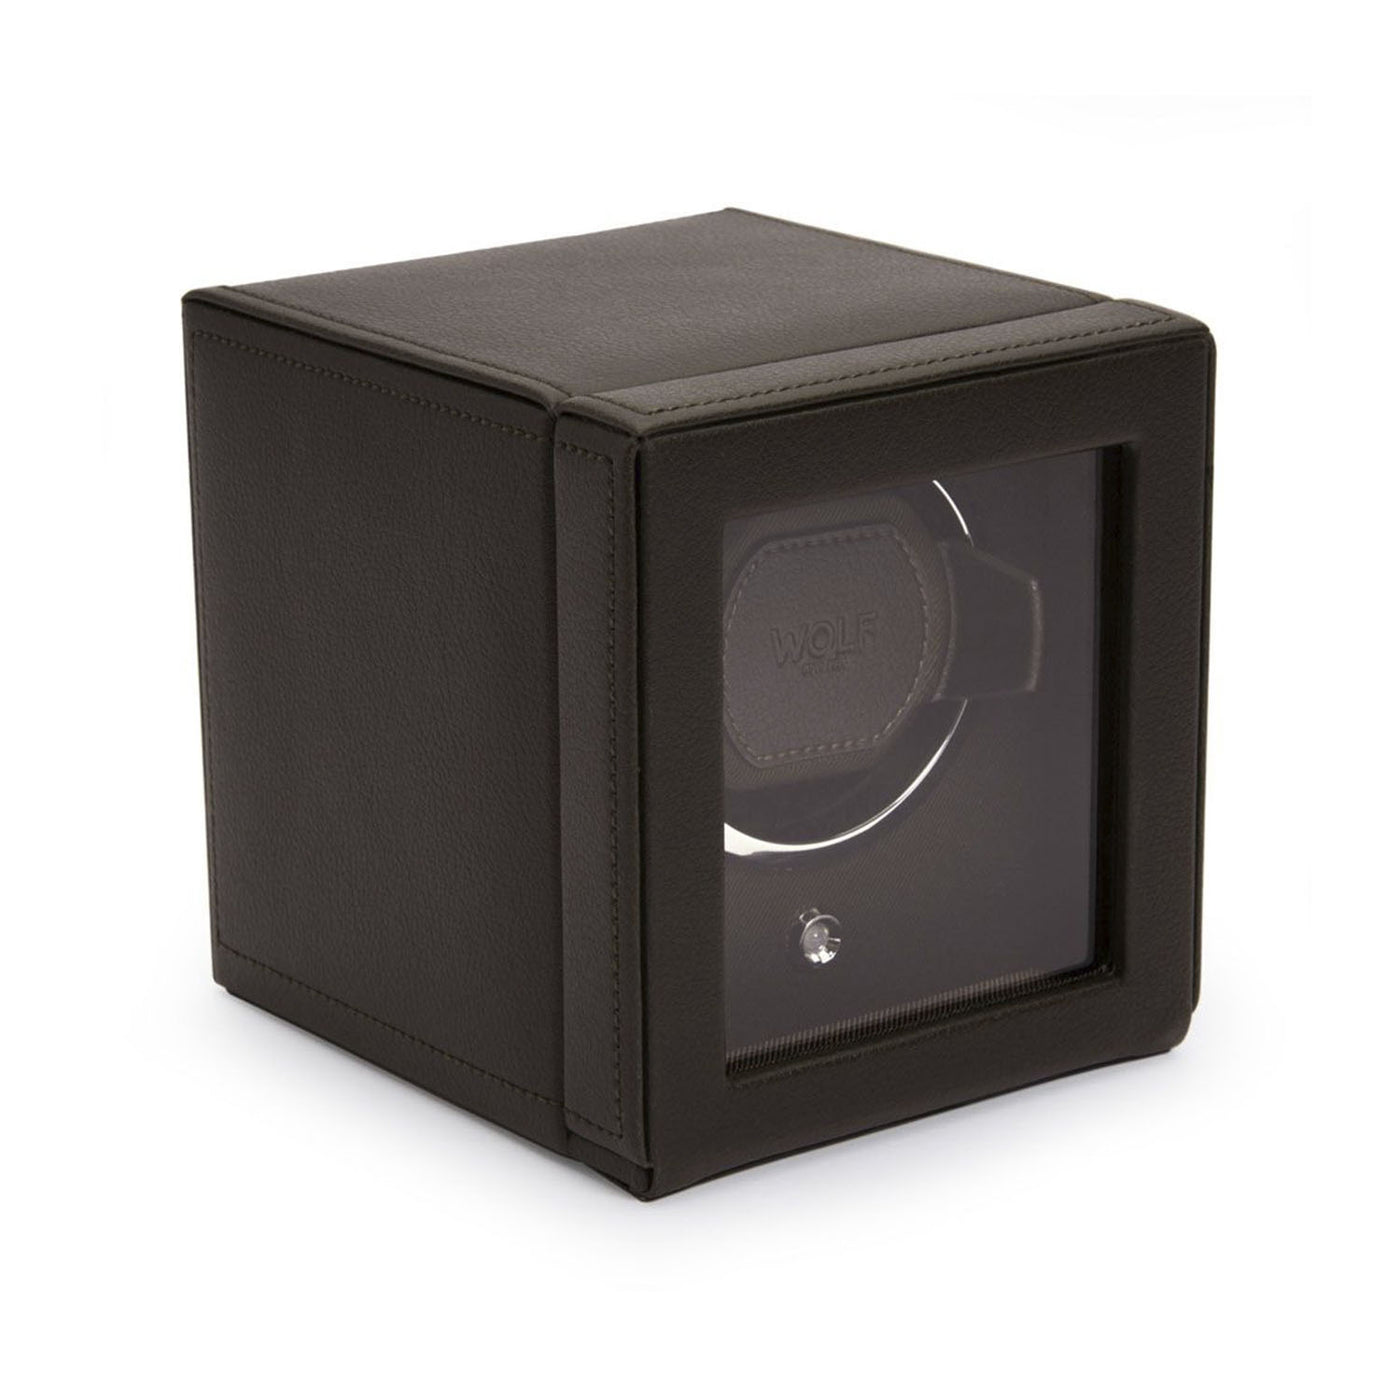 Wolf 1834 Cub Single Watch Winder With Cover – 461106